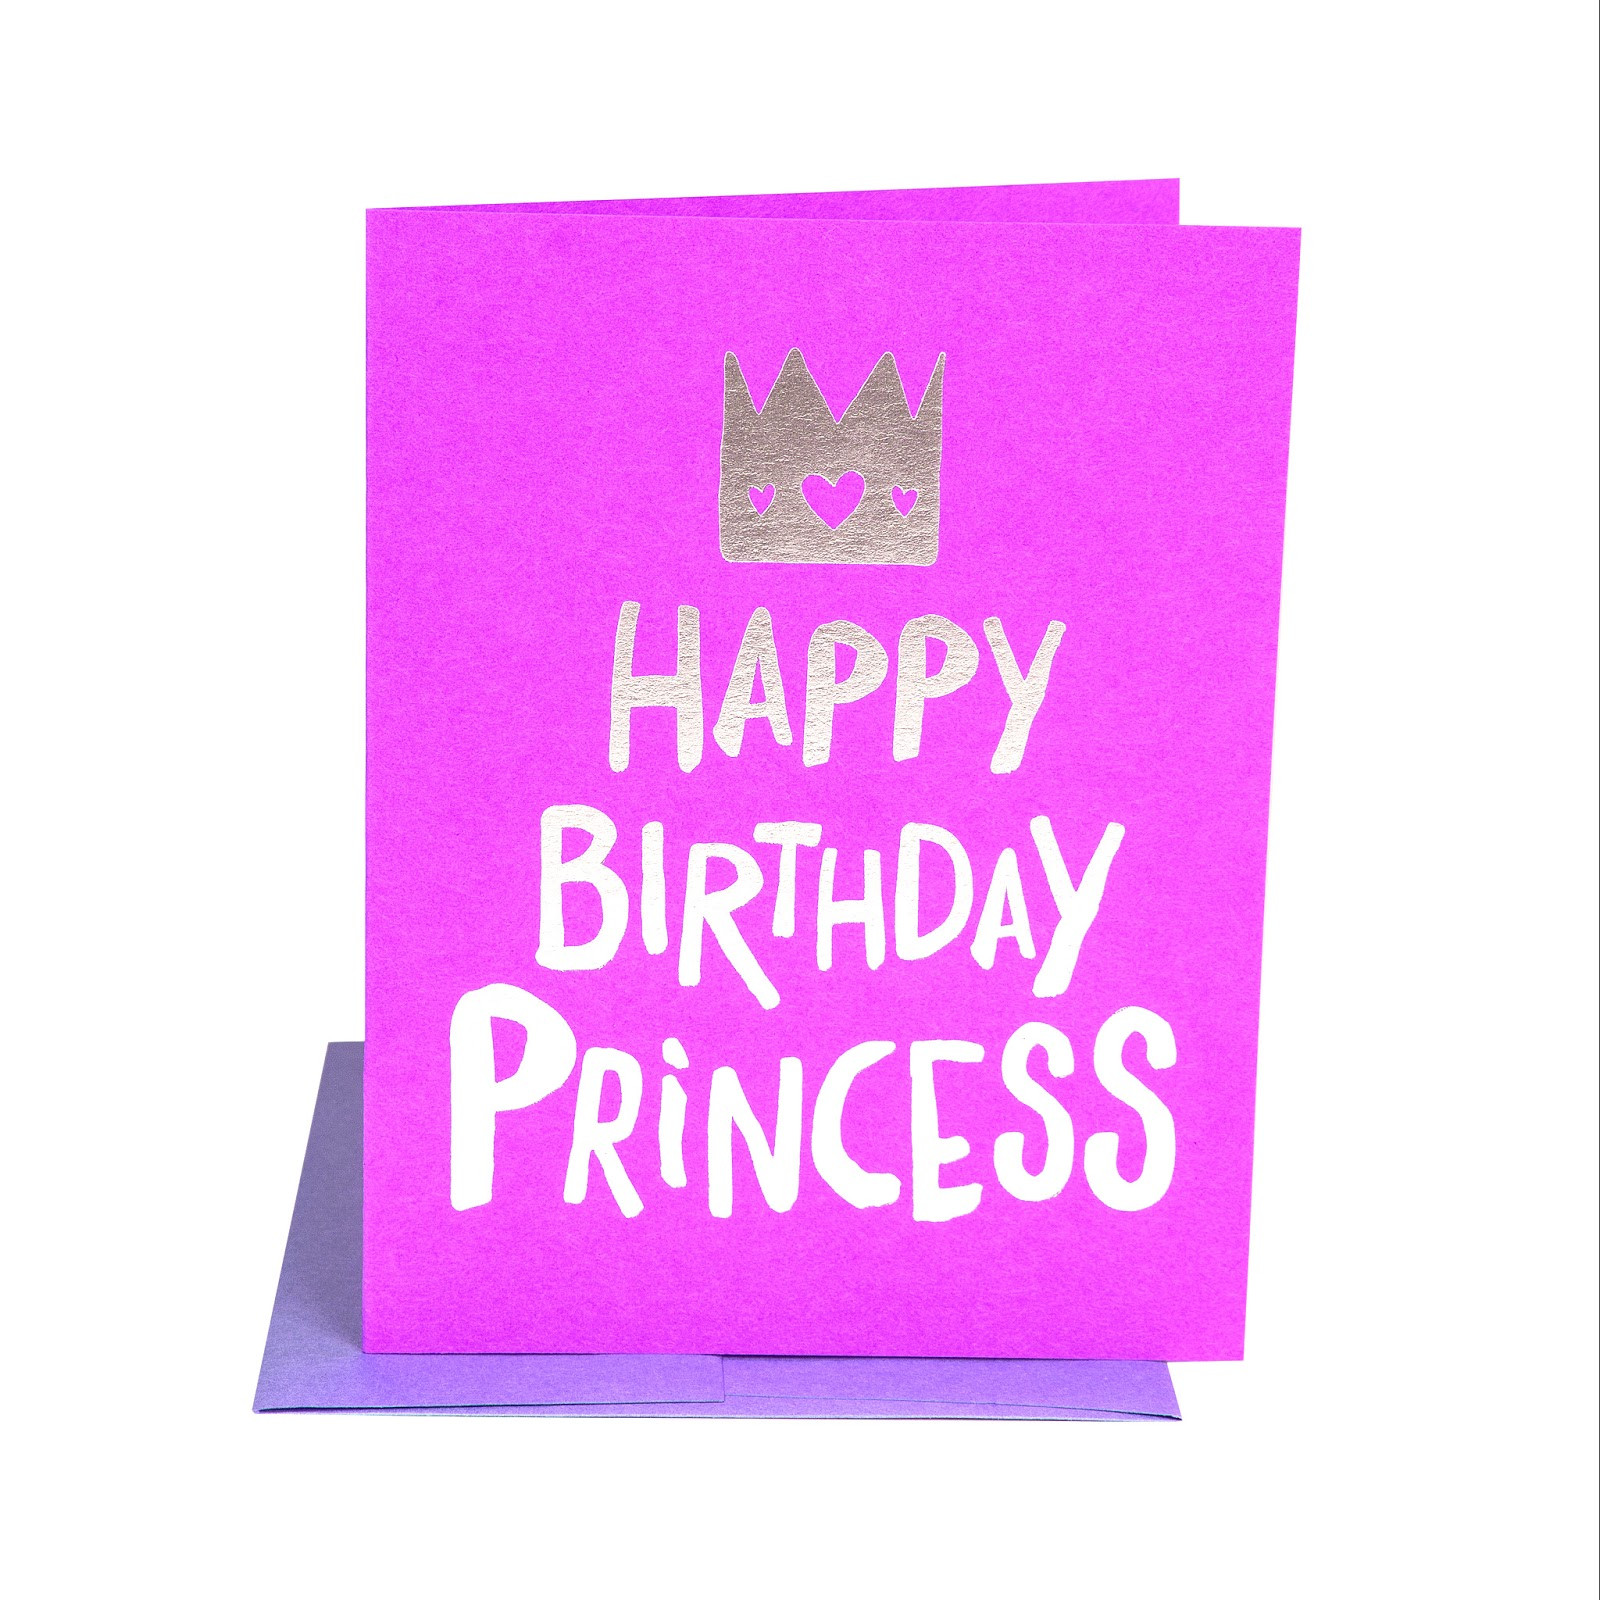 Birthday Princess Quotes
 mylife myjourney myway